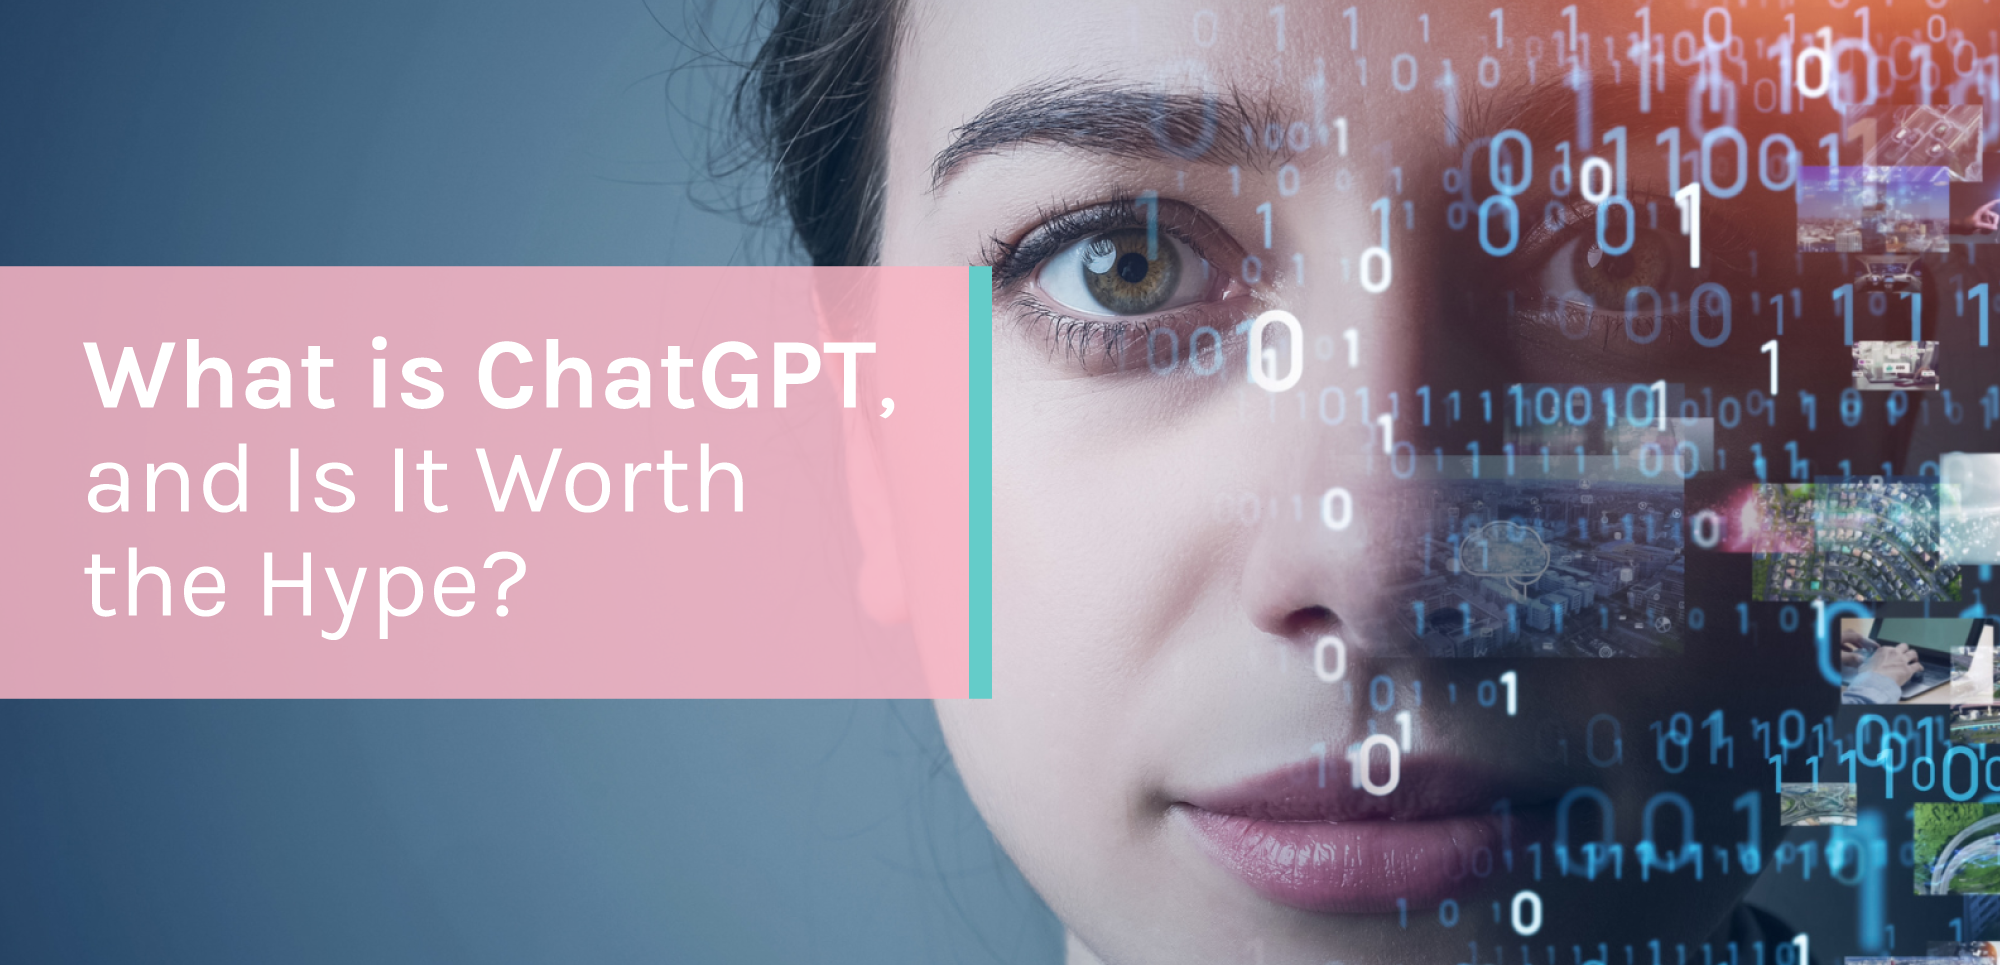 <strong>What is ChatGPT, and Is It Worth the Hype?</strong>